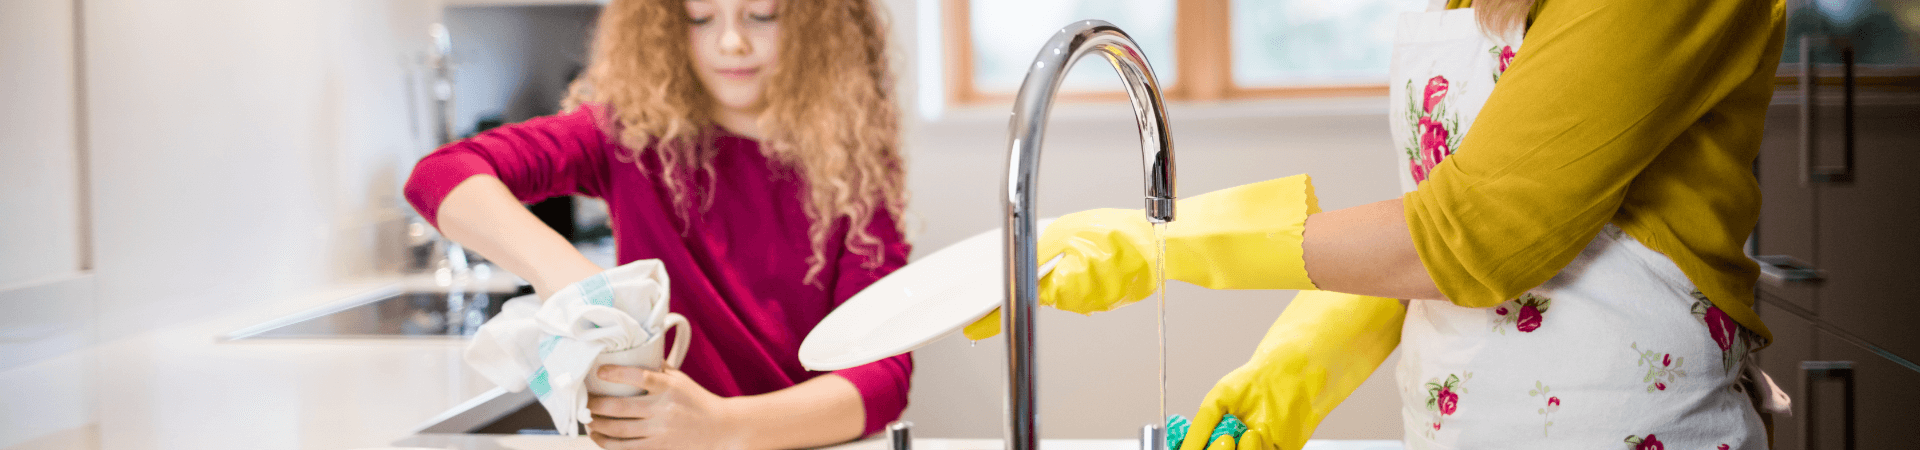 5 Ways to Get Your Kids Cleaning